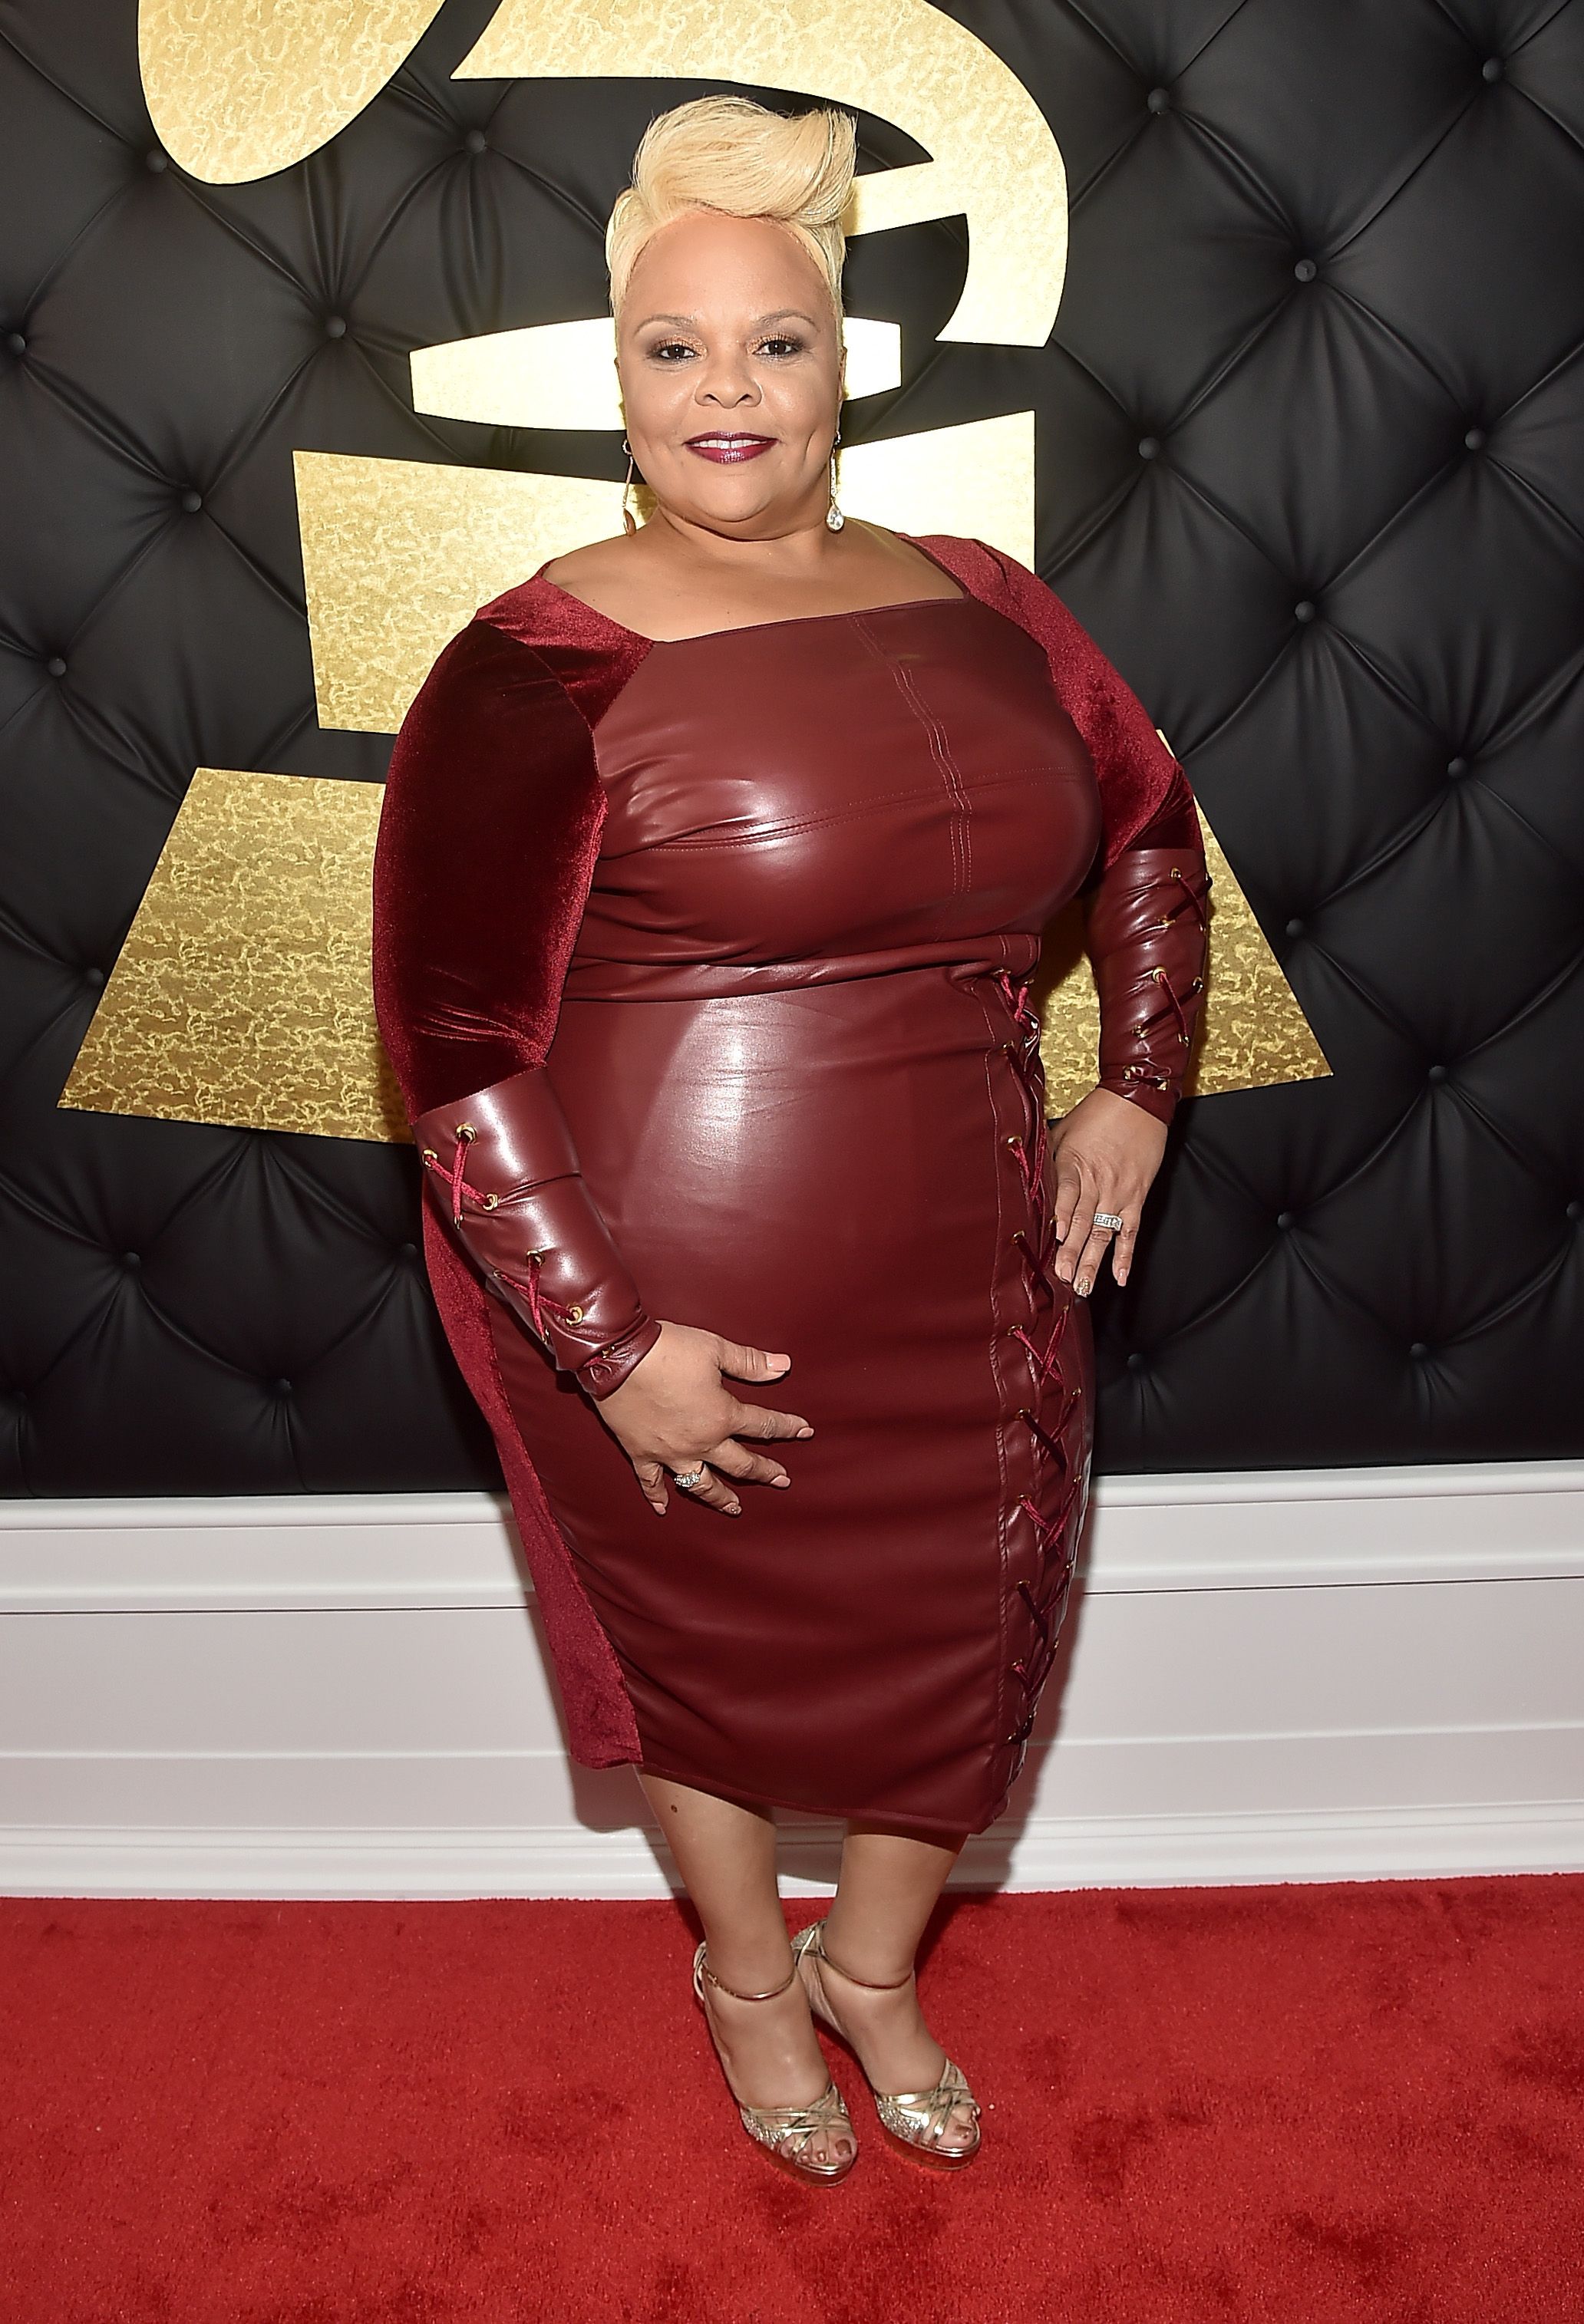 Tamela Mann at The 59th Grammy Awards at Staples Center on February 12, 2017 | Photo: Getty images